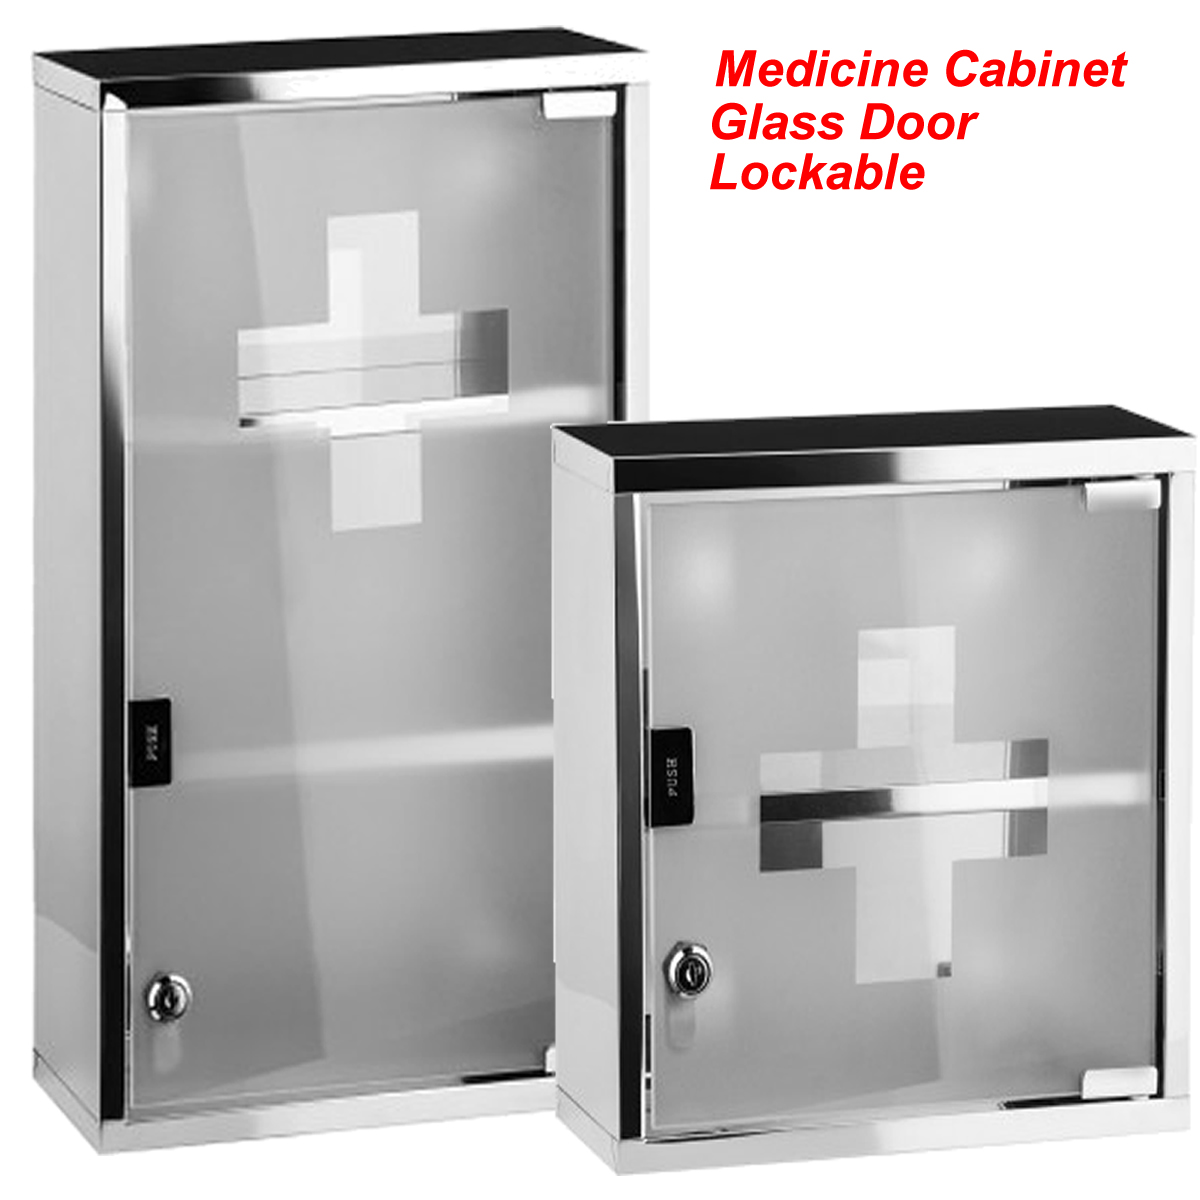 Medicine Cabinet Wall Mounted First Aid Lockable Glass Steel